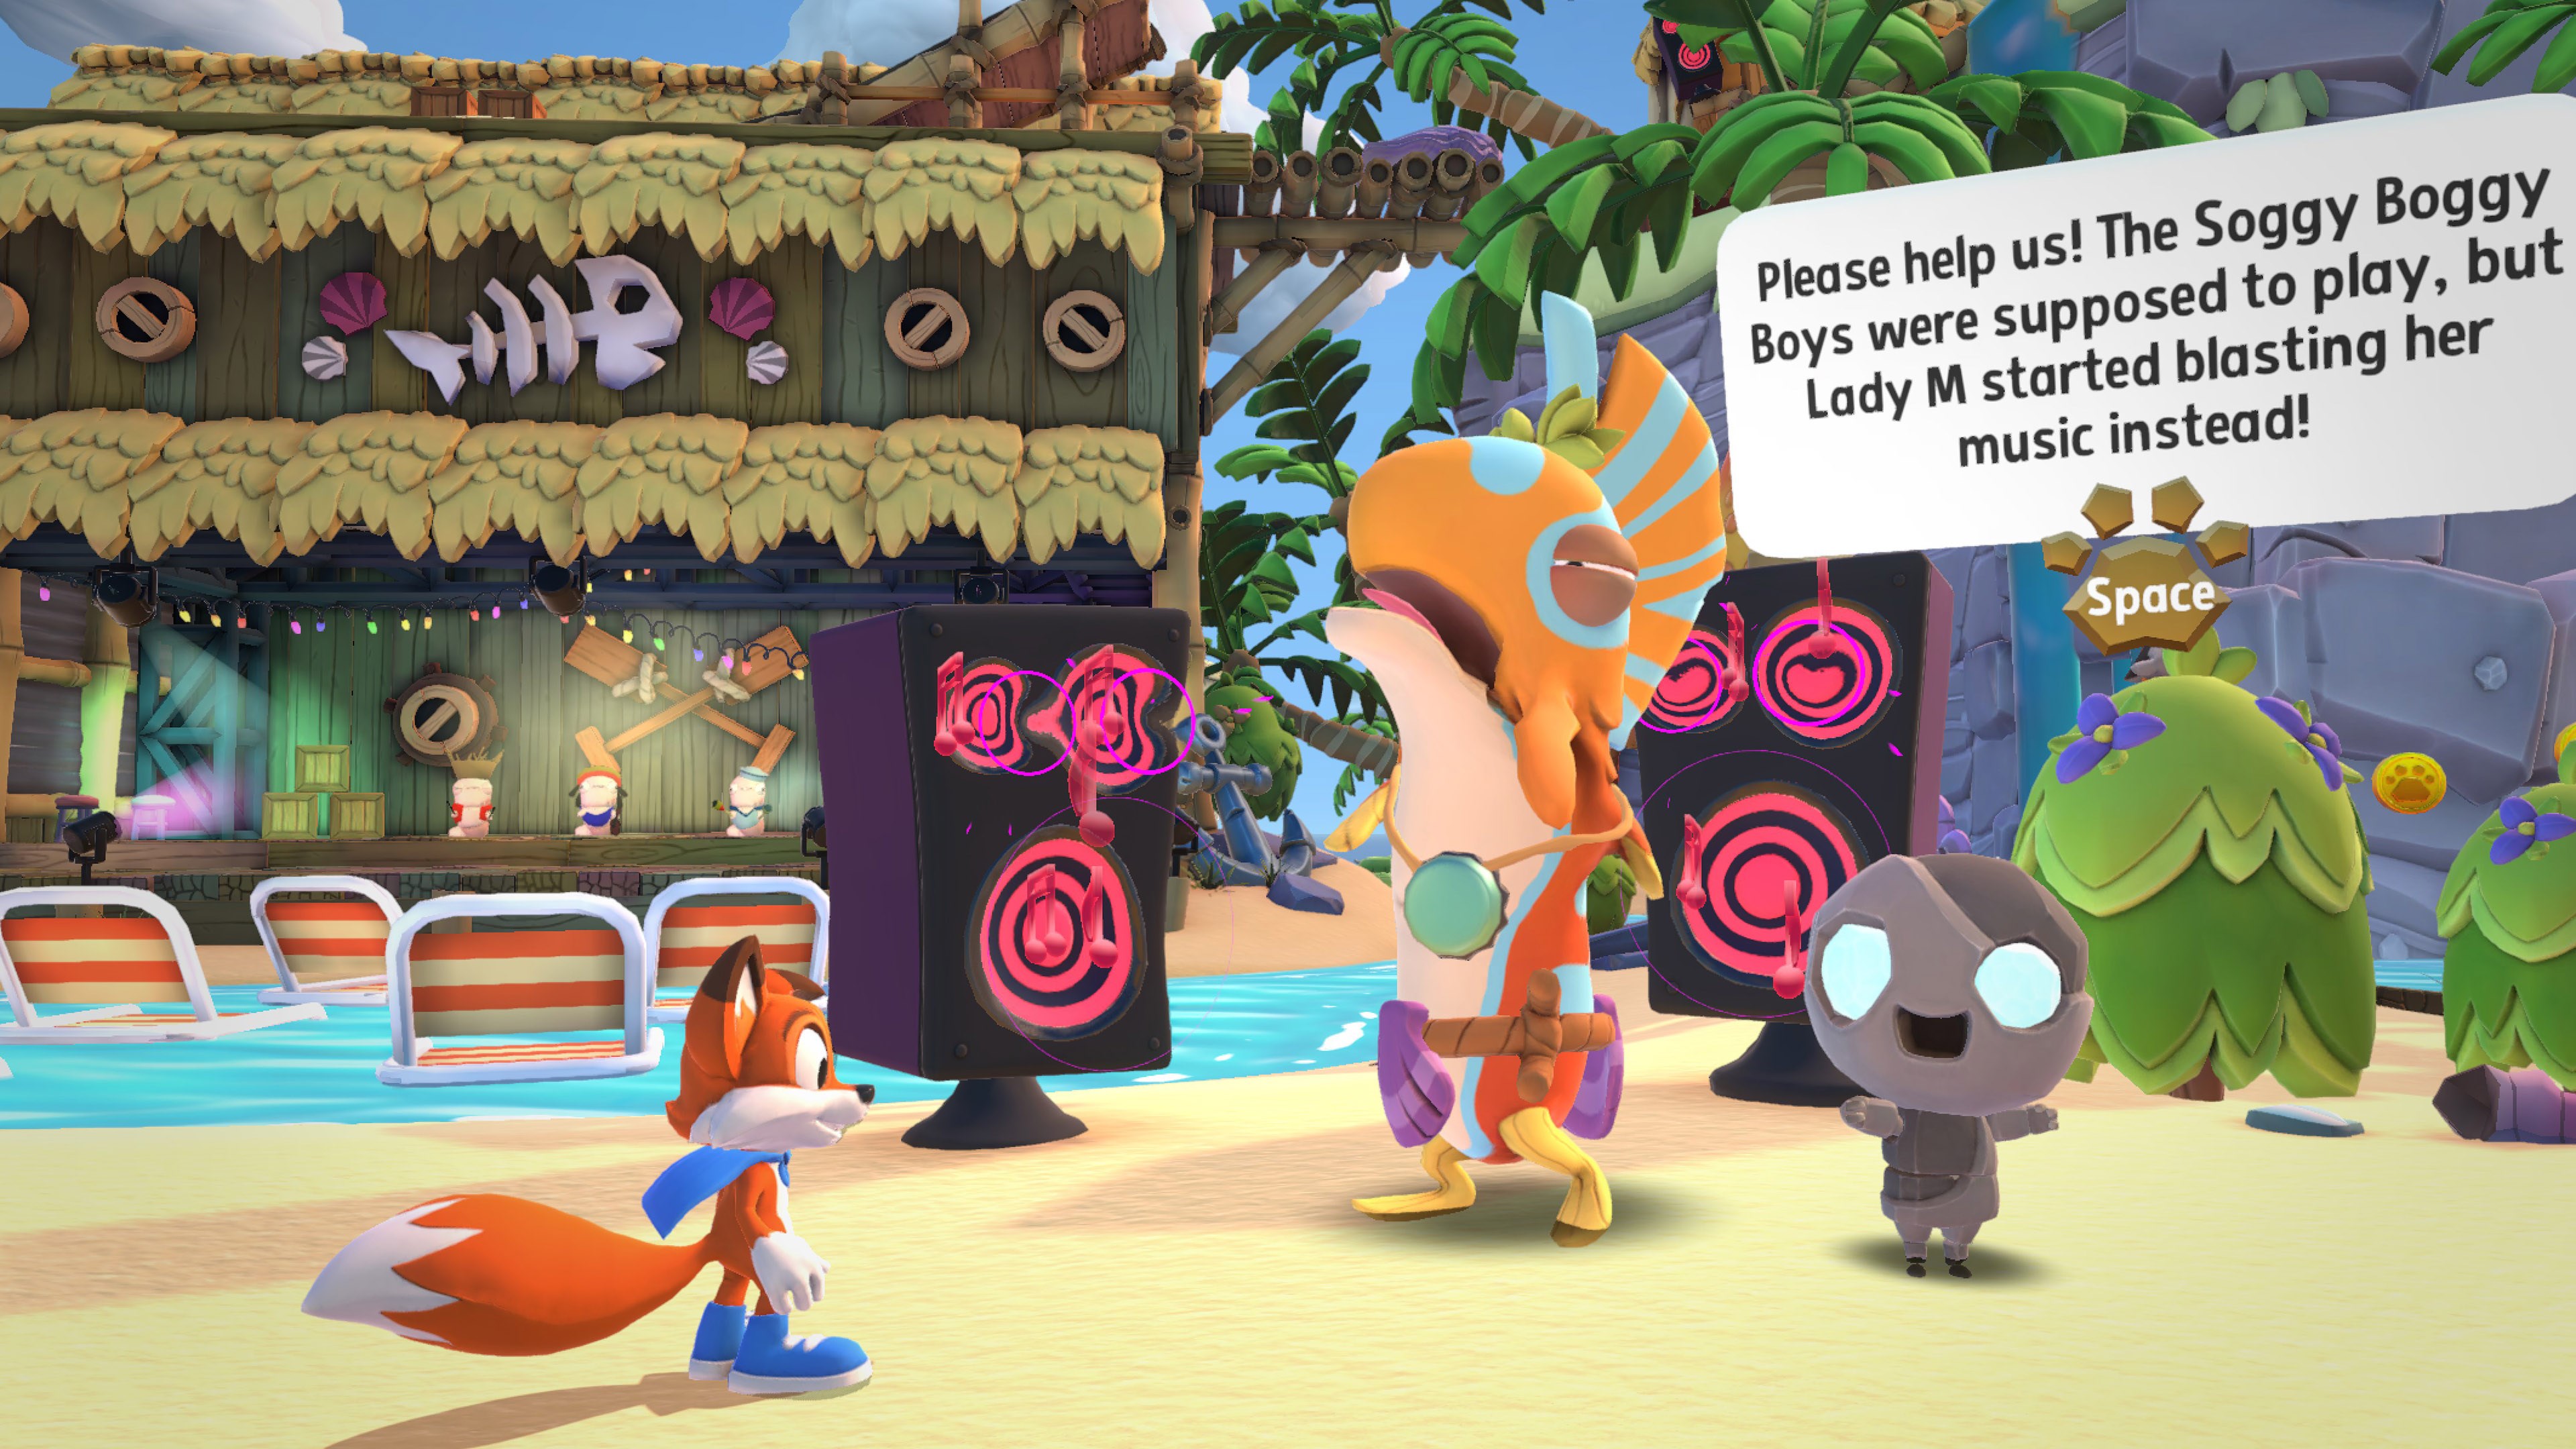 super lucky's tale microsoft store